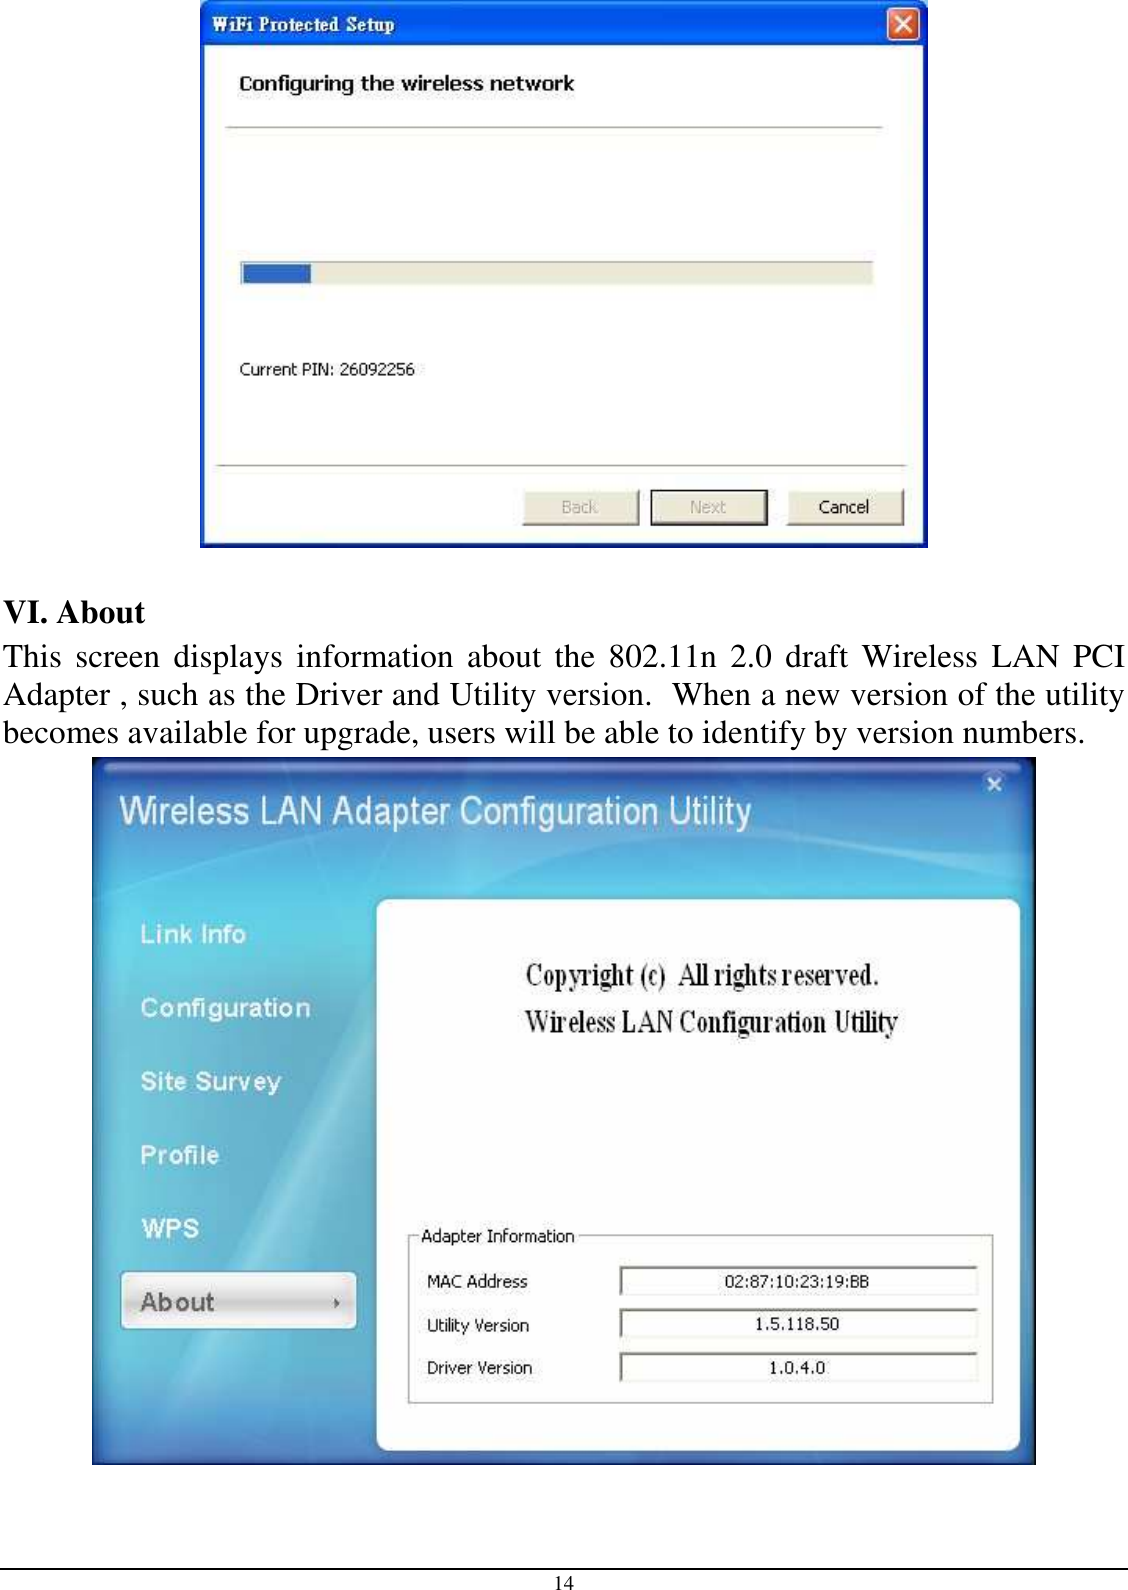 14   VI. About  This  screen displays information about the  802.11n 2.0 draft Wireless  LAN  PCI Adapter , such as the Driver and Utility version.  When a new version of the utility becomes available for upgrade, users will be able to identify by version numbers.  